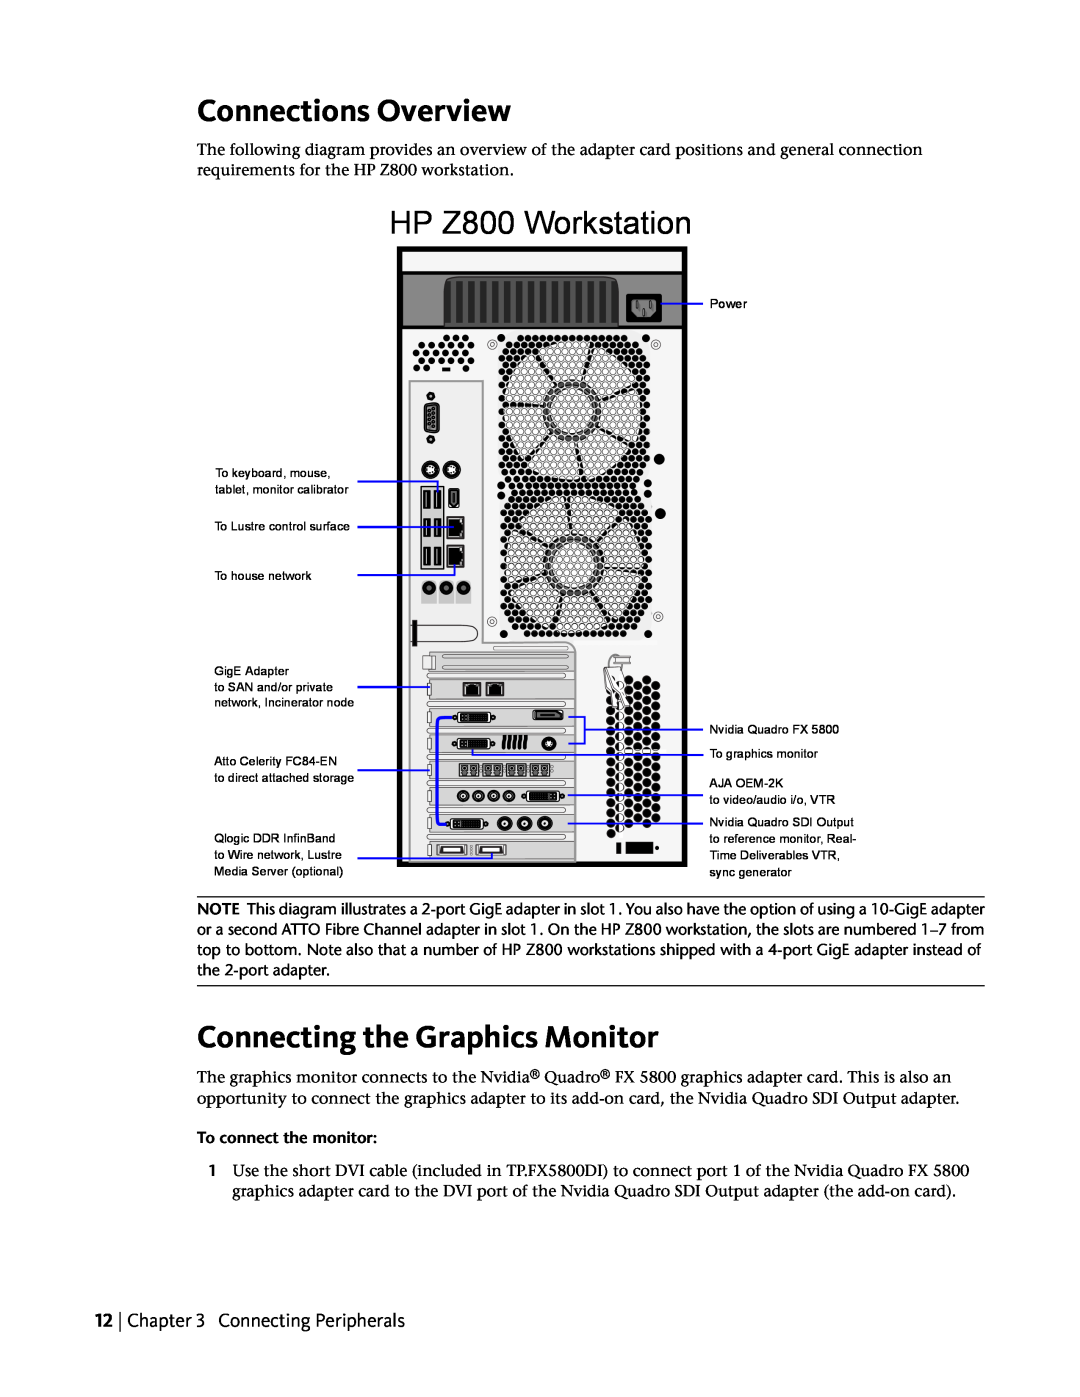 HP manual Connections Overview, Connecting the Graphics Monitor, Connecting Peripherals, HP Z800 Workstation 